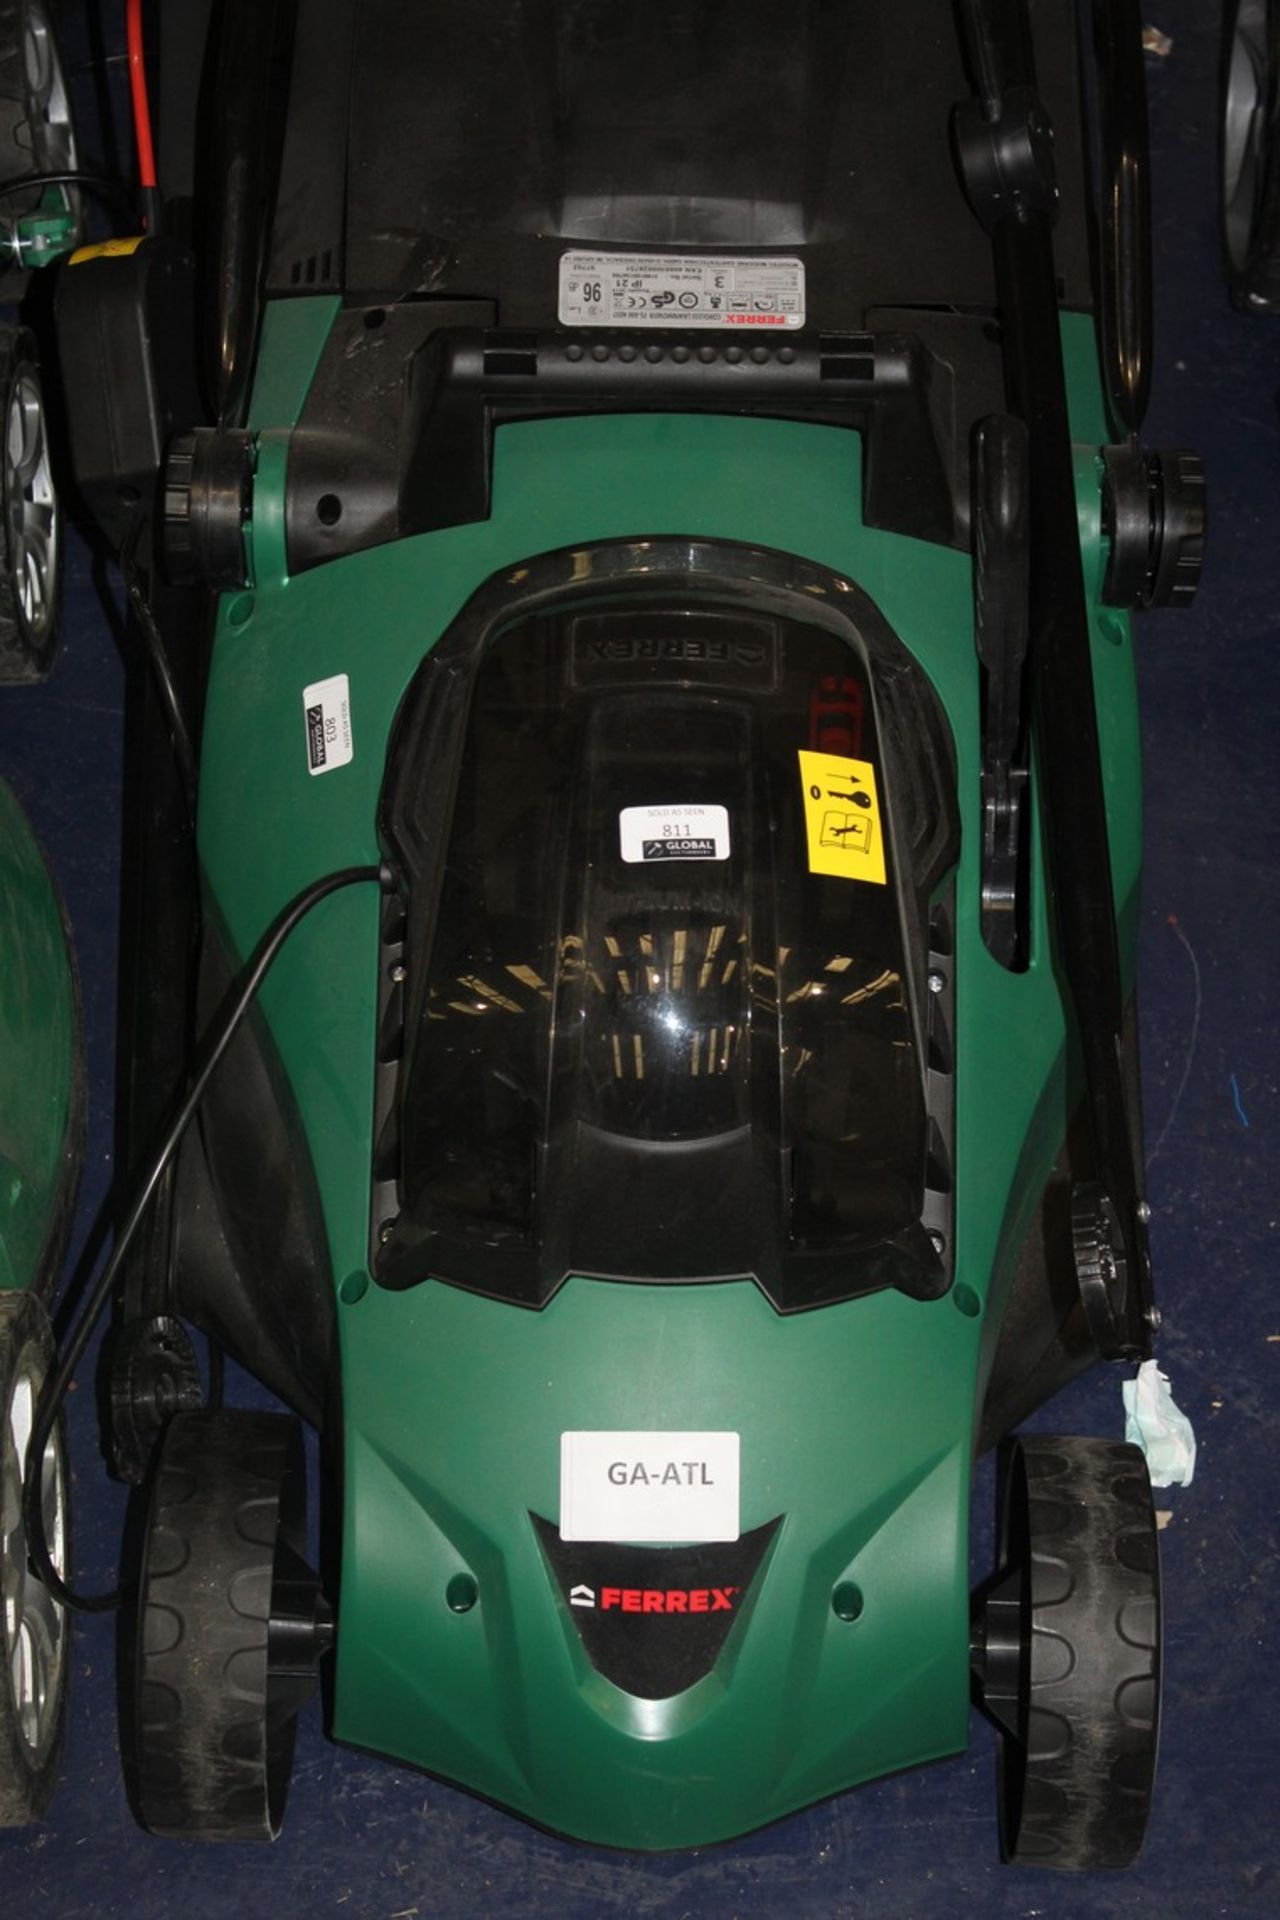 Ferrex Cordless Lawnmower RRP £60 (Appraisals Are Available Upon Request) (Pictures Are For